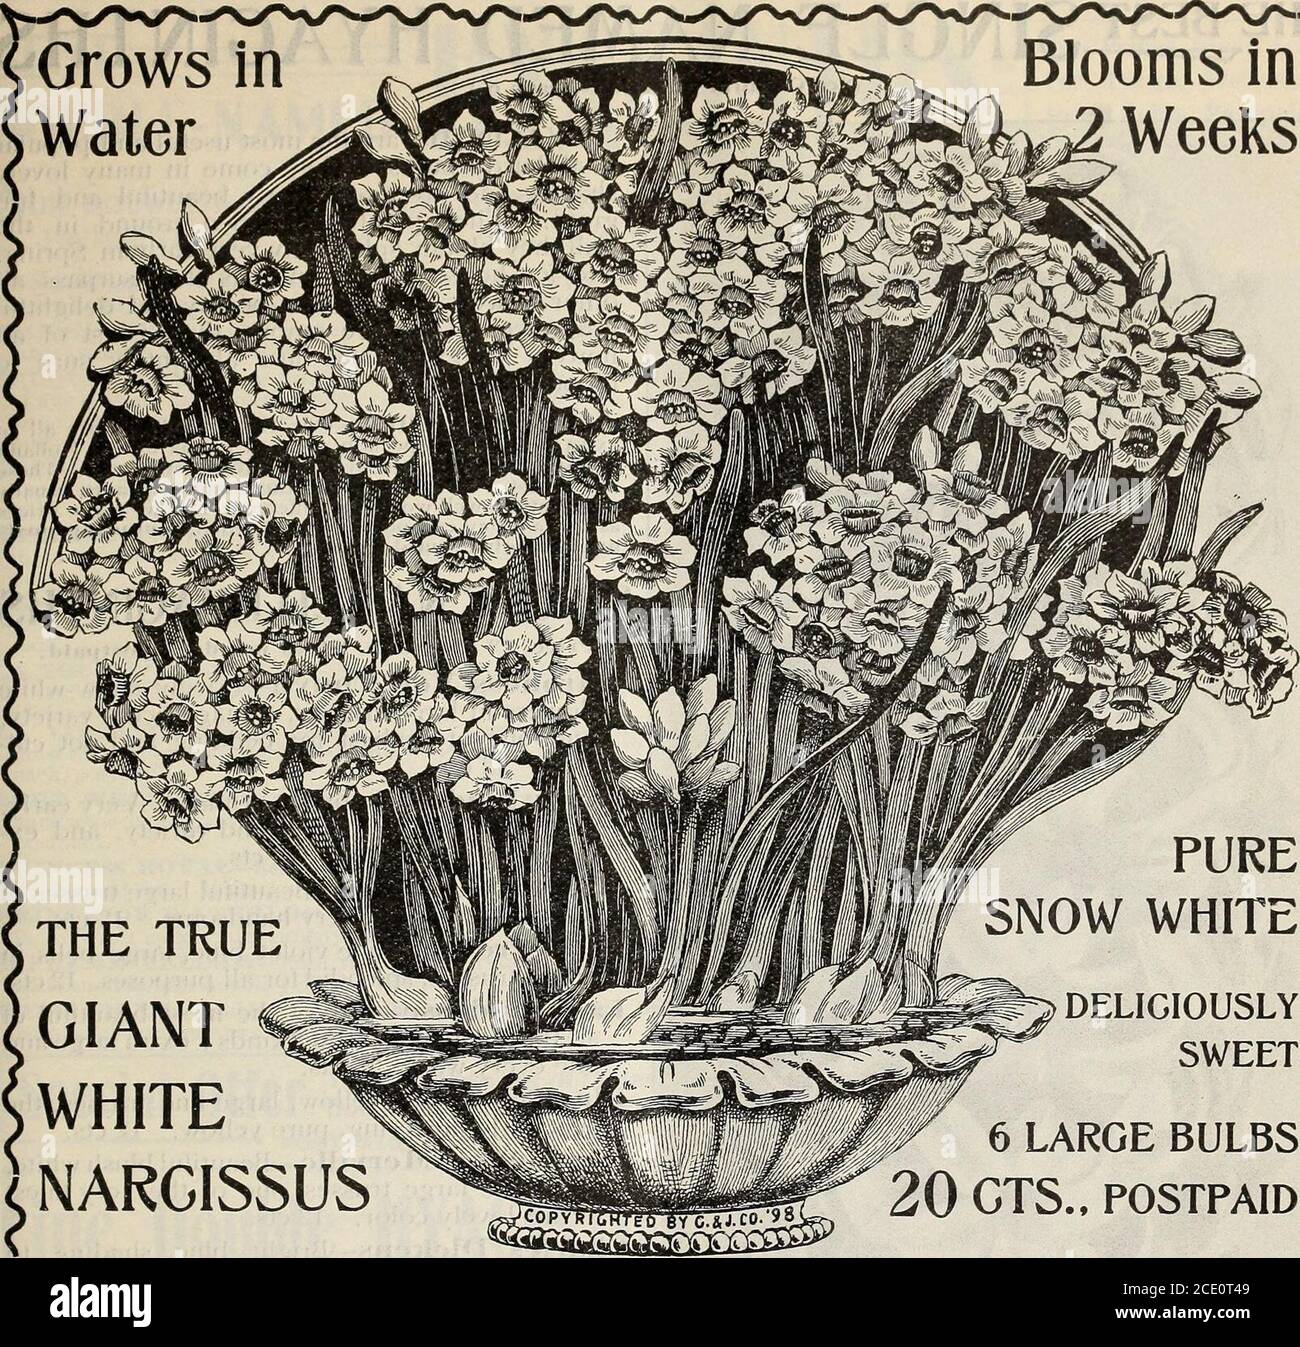 . New floral guide : autumn 1903 . OXALIS-GRAND DUCHESS NERINE SARNIENSIS (Guernsey Lily) A beautiful variety of Amaryllis flowering freely through the Winter months. Large lily-like flowers, brilliant crimson andlooking as if sprinkled with gold dust. A good bloomer; very handsome and desirable. 20 cts. each; 32.00 per doz., postpaid, New Floral Guide—Autumn, 1903.. PURE!0W WHITE DELICIOUSLYSWEET 6 LARGE BULBS20 GTS., POSTPAID THE TRUE GIANTWHITE* NARCISSUS Giant White Narcissus Will grow in water and produce great masses of snow-white, fragrant flowers,two weeks after planting. Splendid for Stock Photo